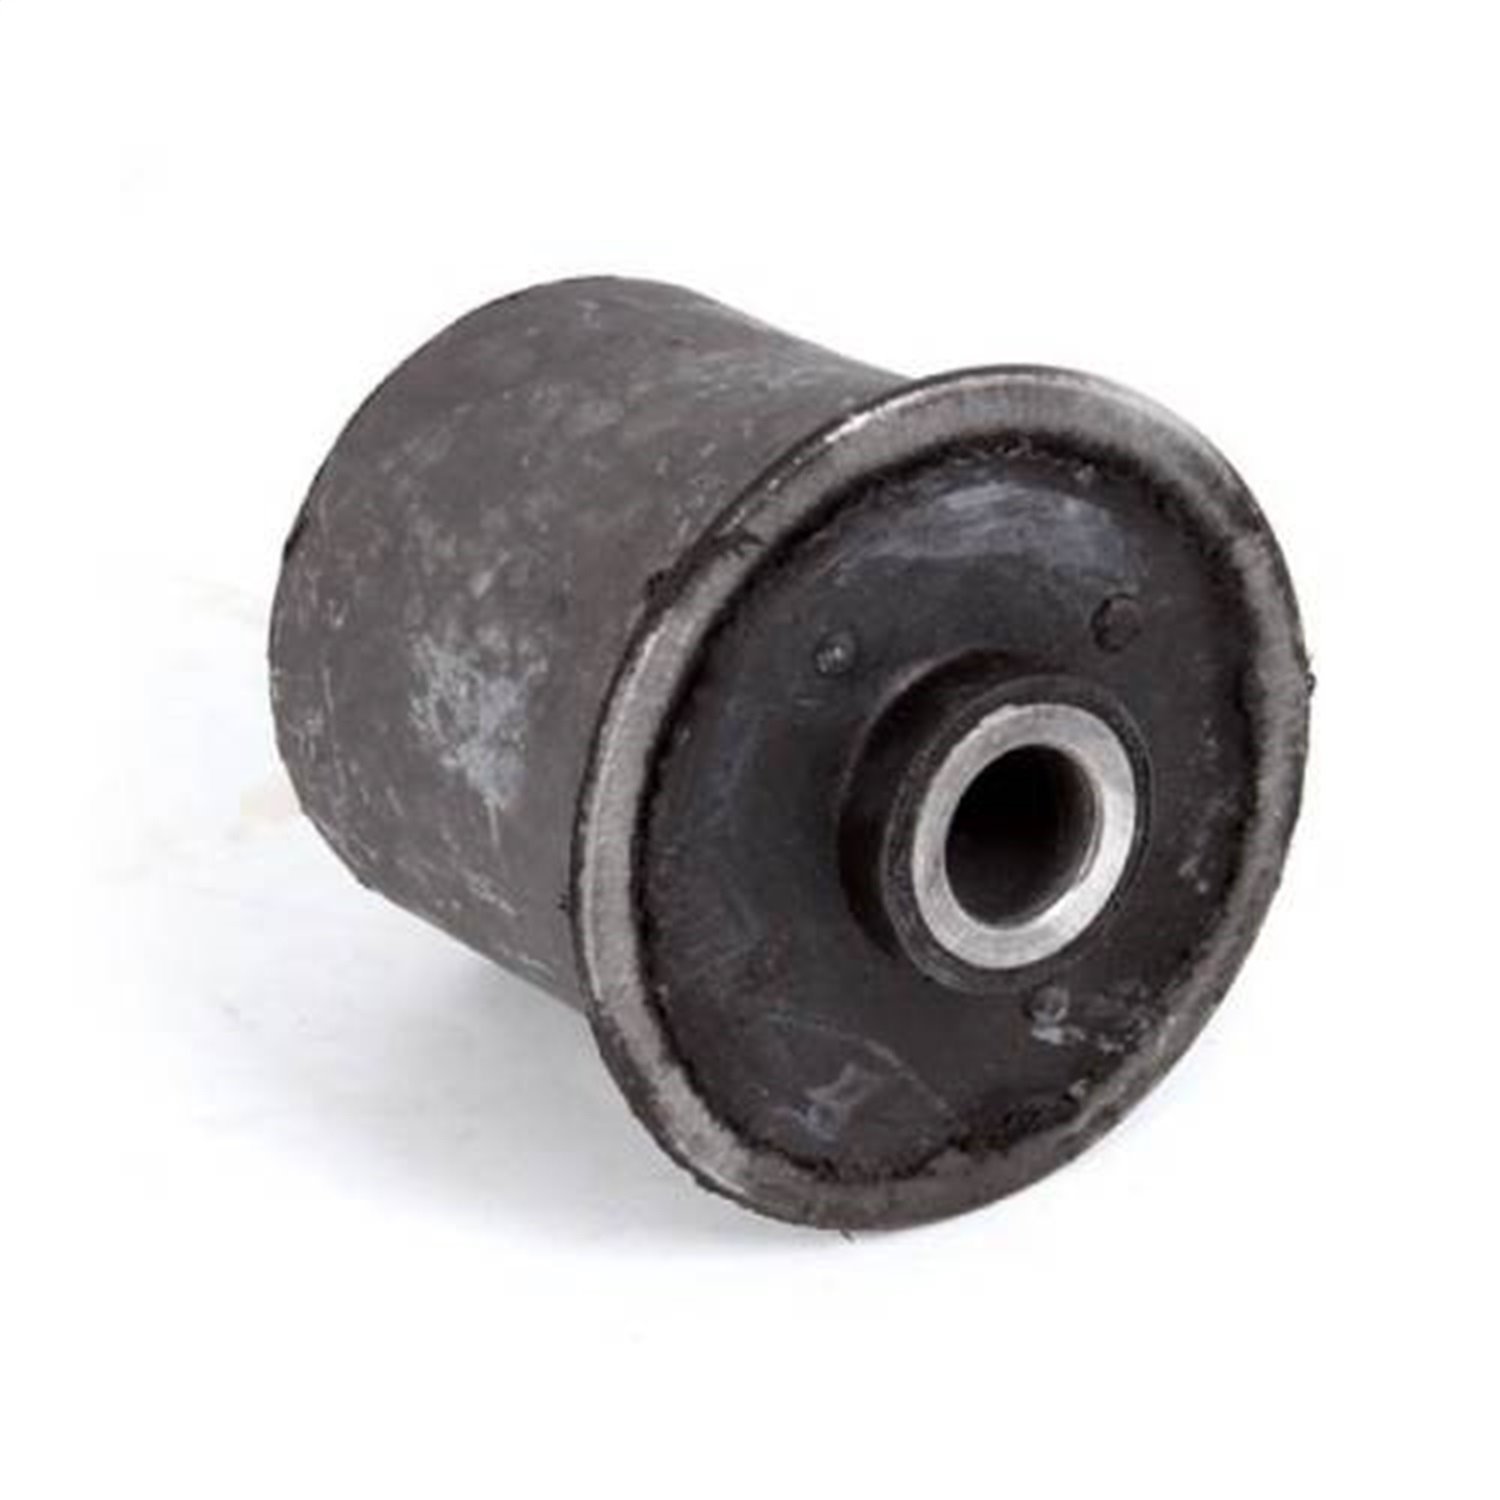 This lower control arm bushing fits the rear lower control arm on 02-03 Jeep Liberty KJ .